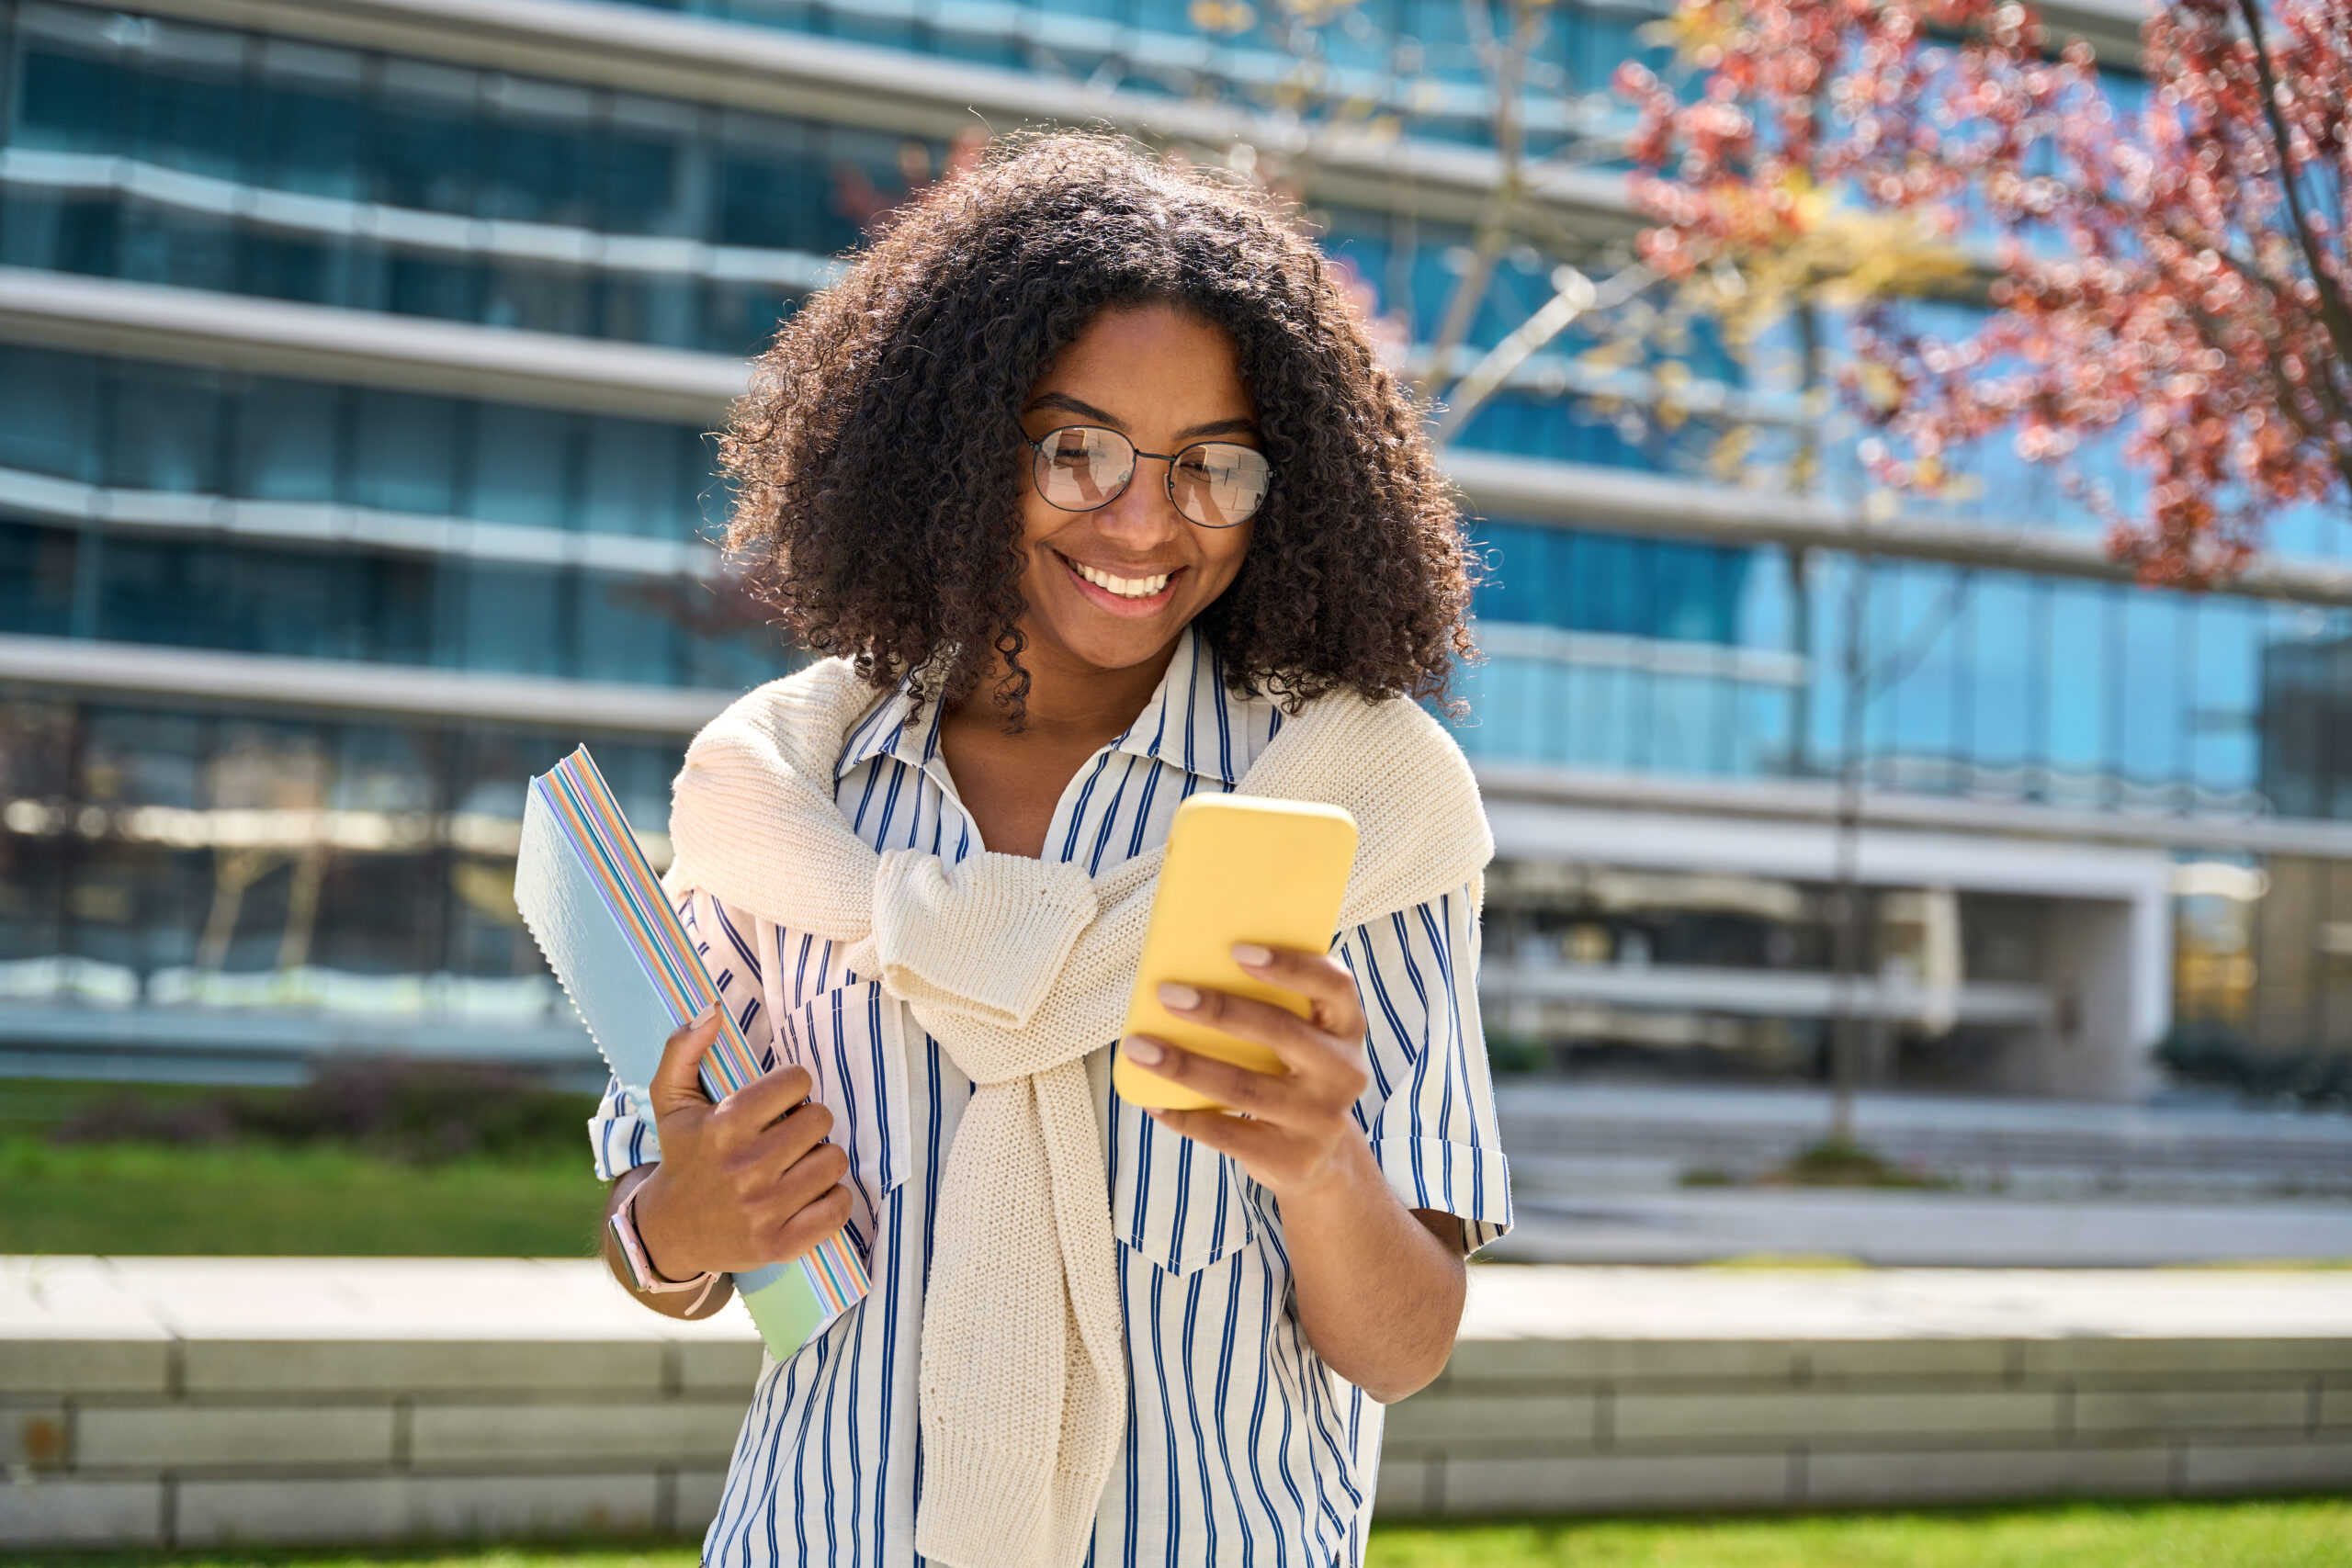 Young happy African American girl walking in city park using mobile phone shopping online or texting messages. Smiling female student holding cellphone chatting going along campus area.